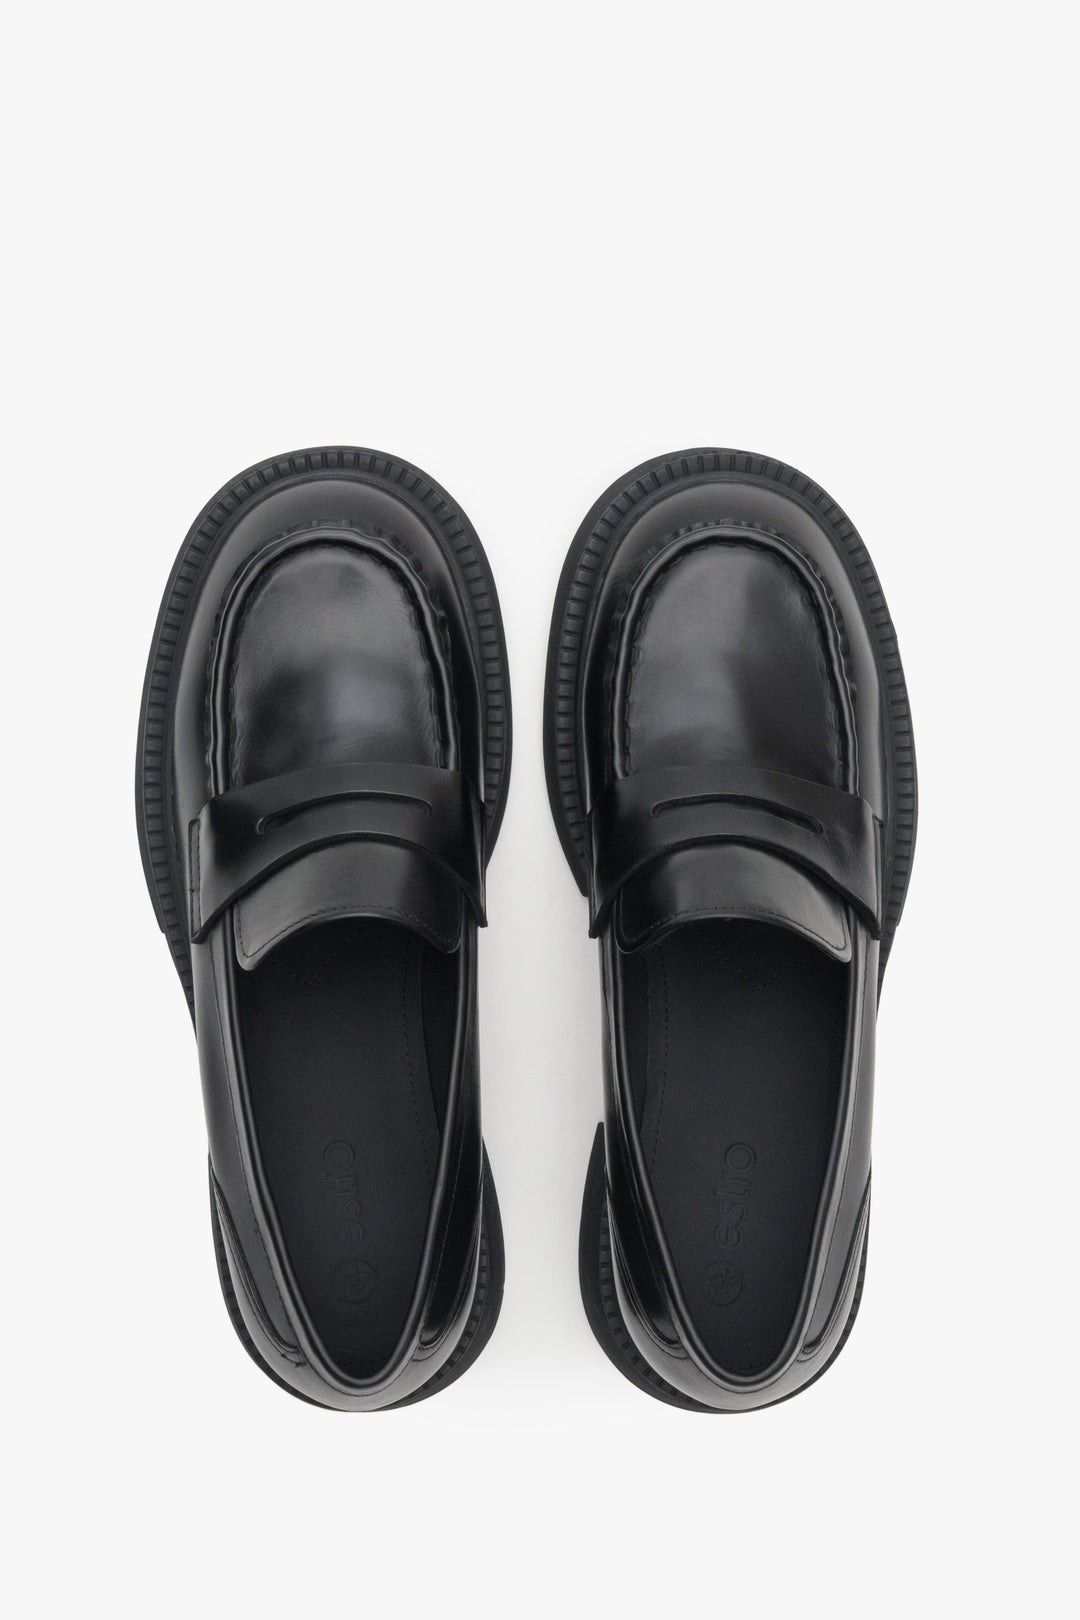 Women's moccasins made of genuine leather in black by Estro - close-up on details.